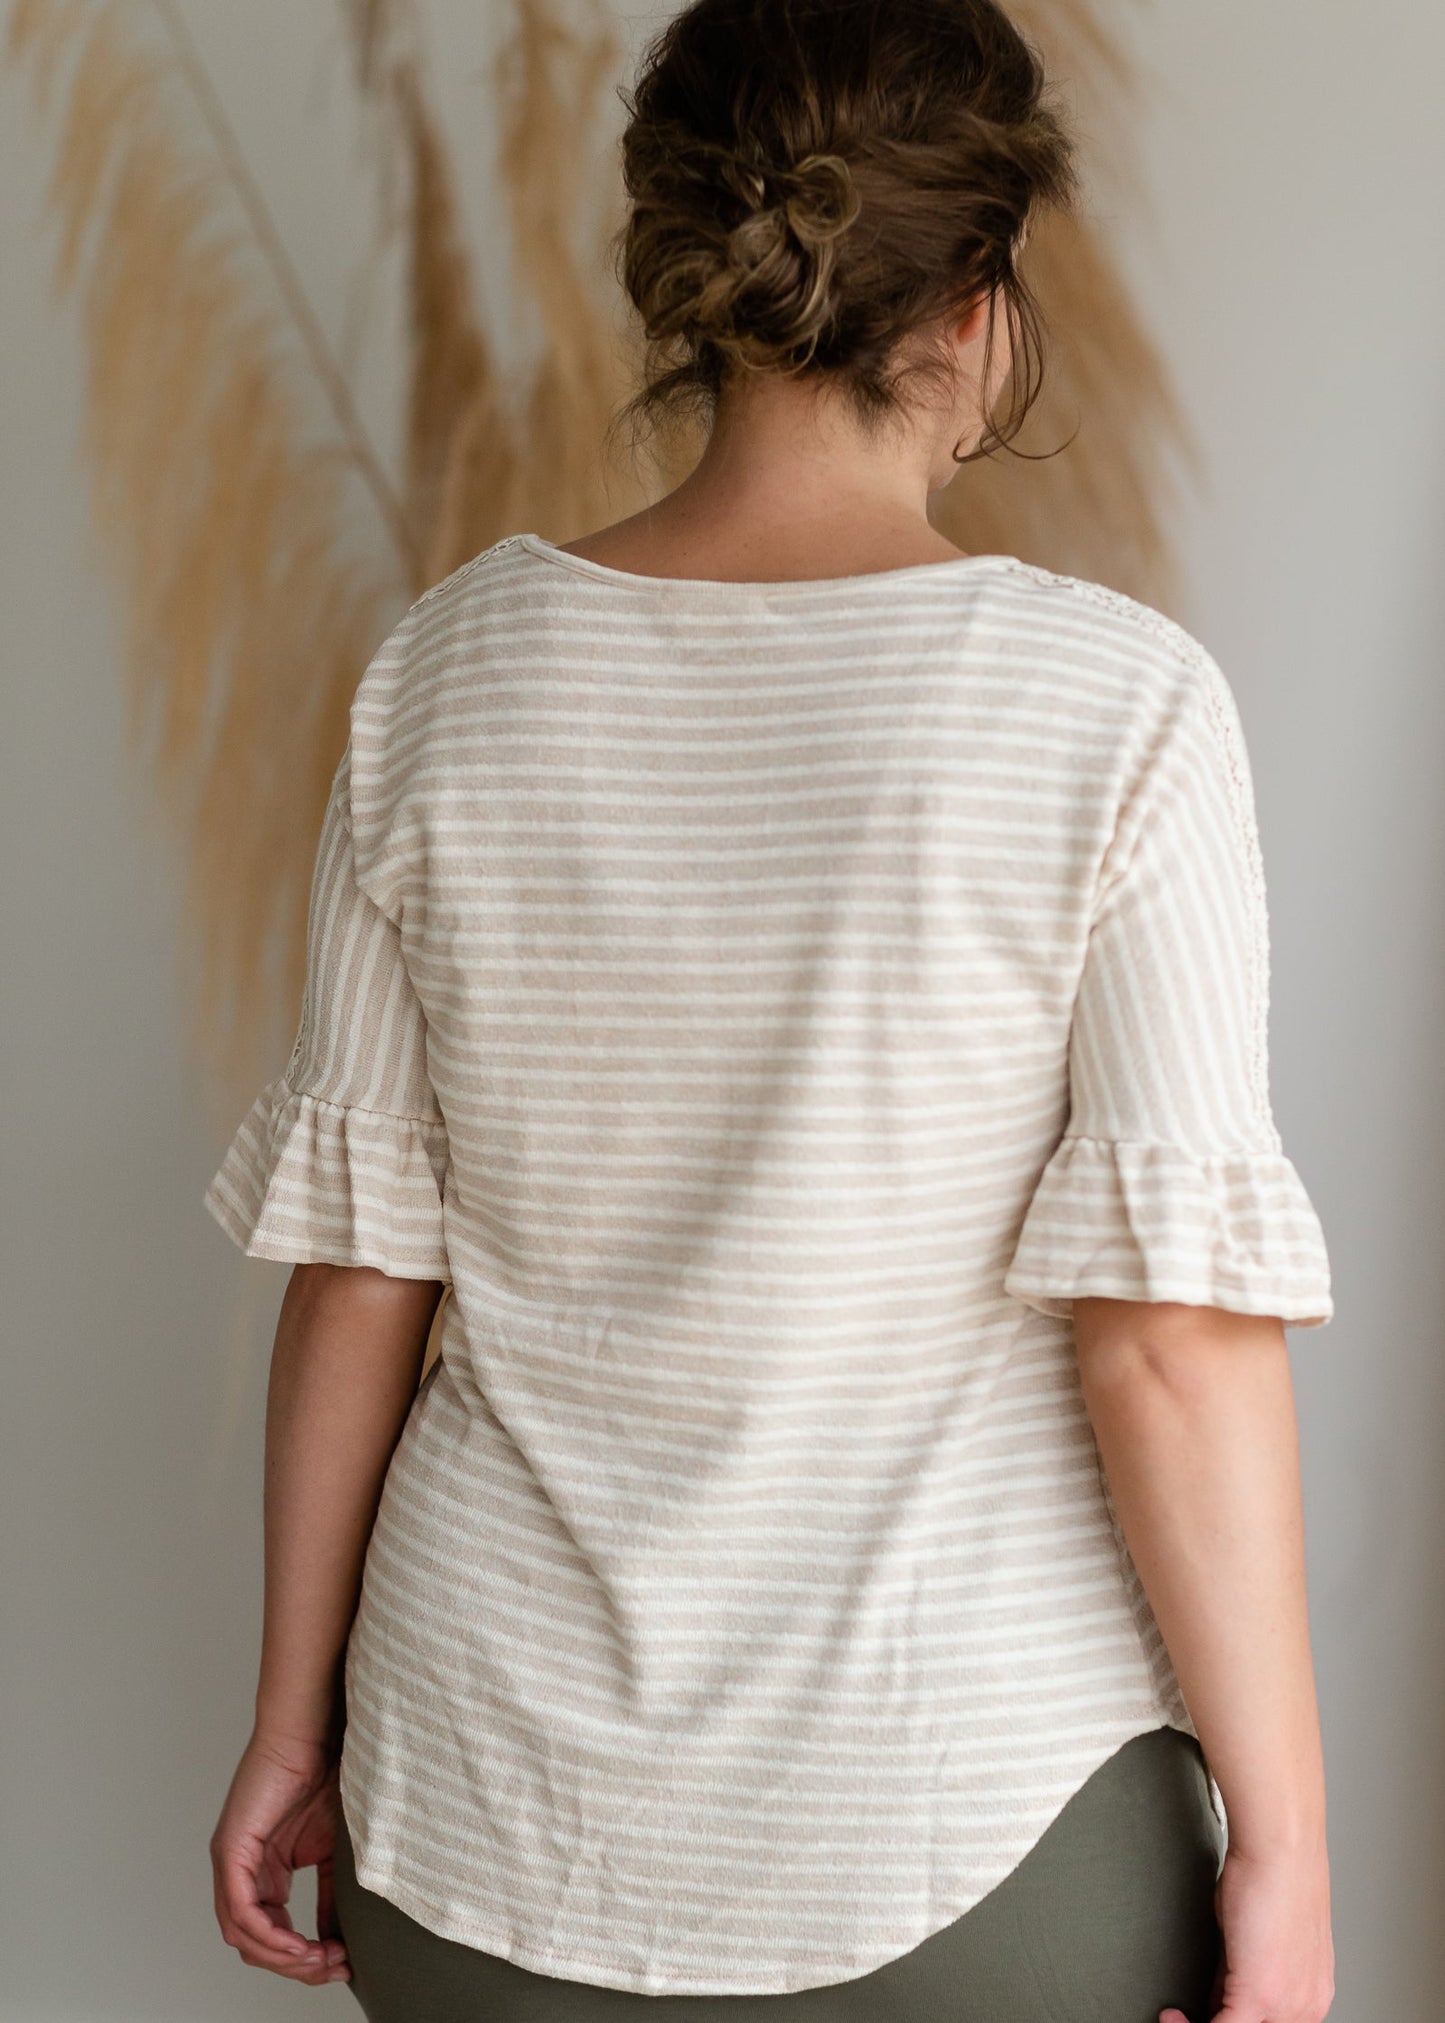 Oatmeal & White Bell Sleeve Striped Top Shirt Hailey & Co.